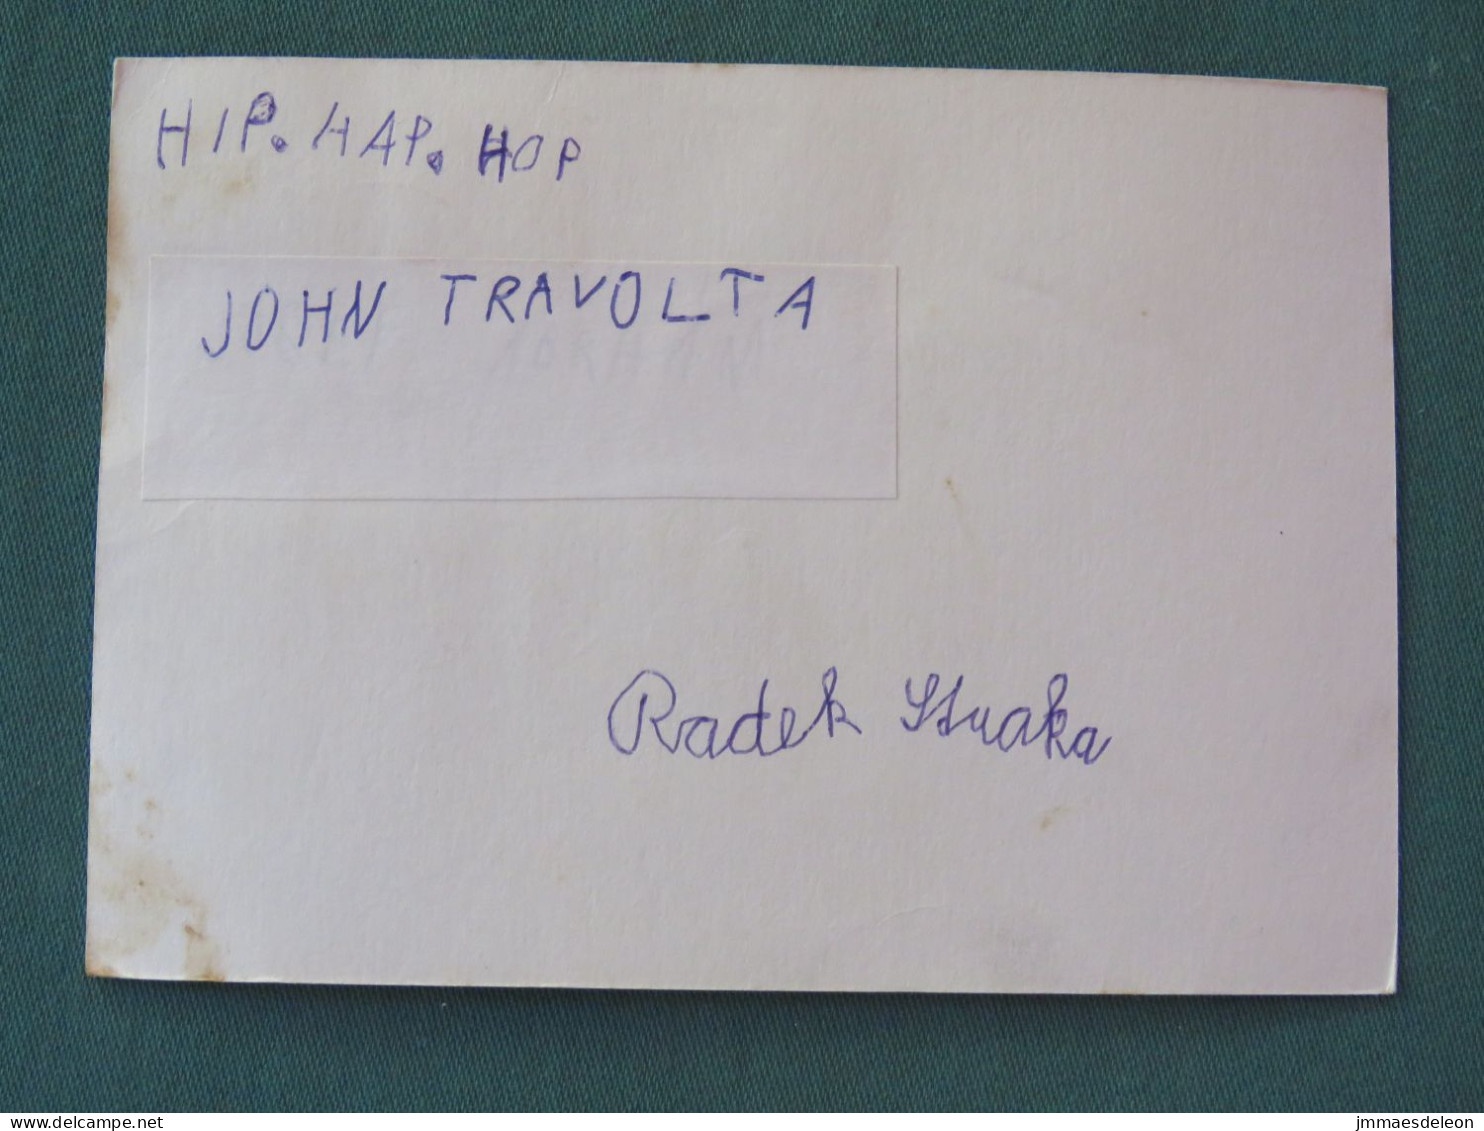 Czech Republic 1997 Stationery Postcard Hora Rip Mountain Sent Locally - Lettres & Documents